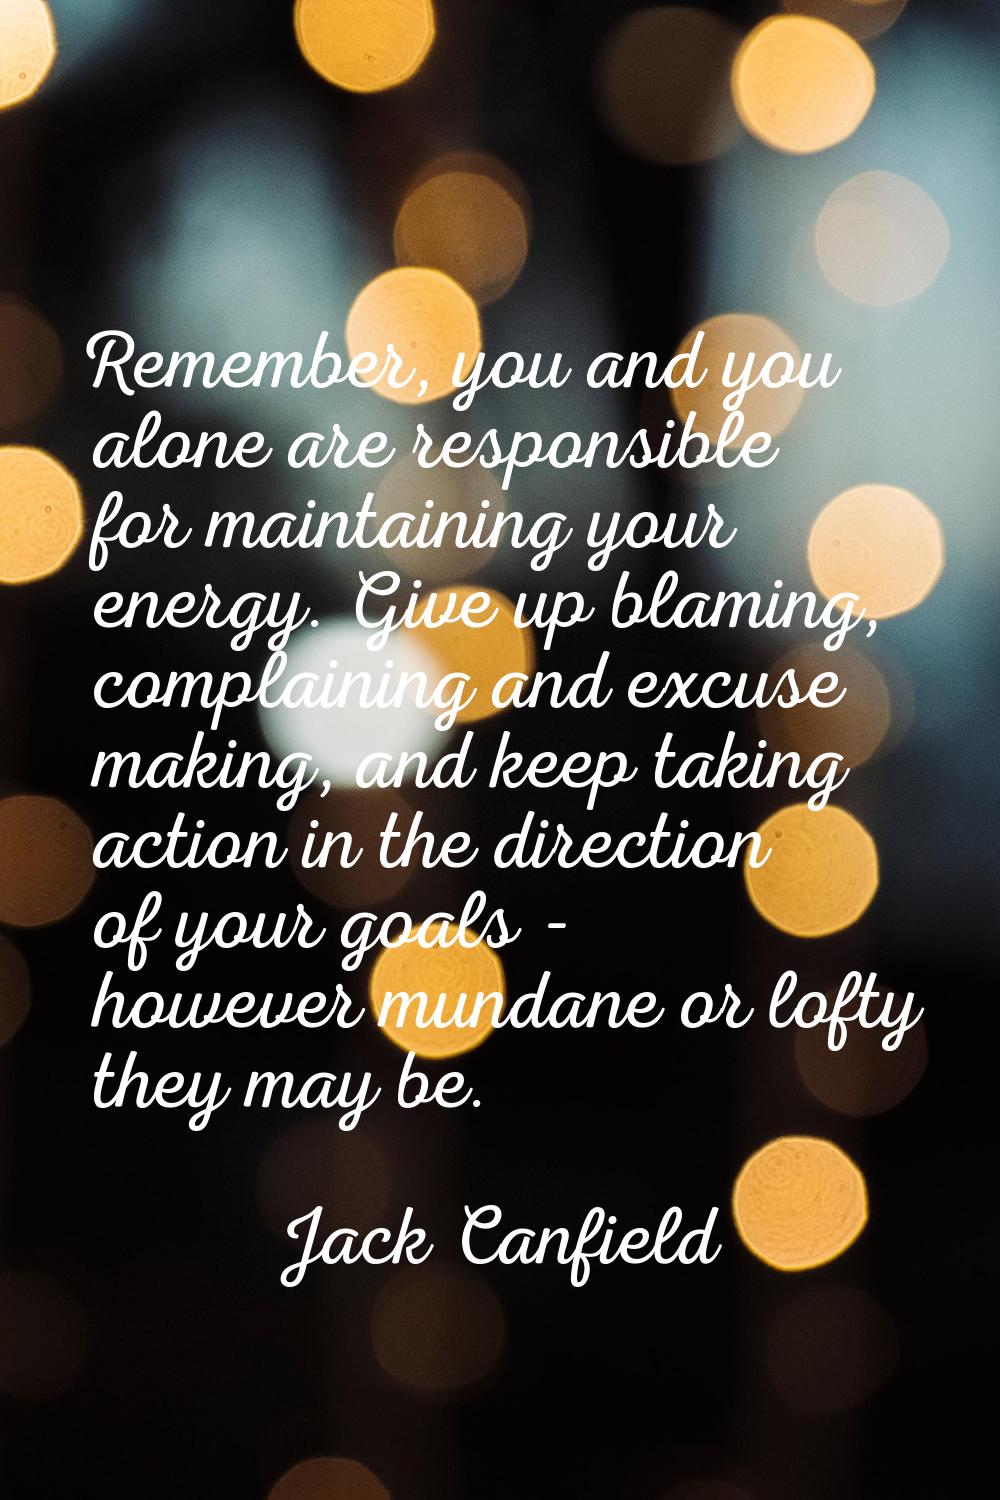 Remember, you and you alone are responsible for maintaining your energy. Give up blaming, complaini